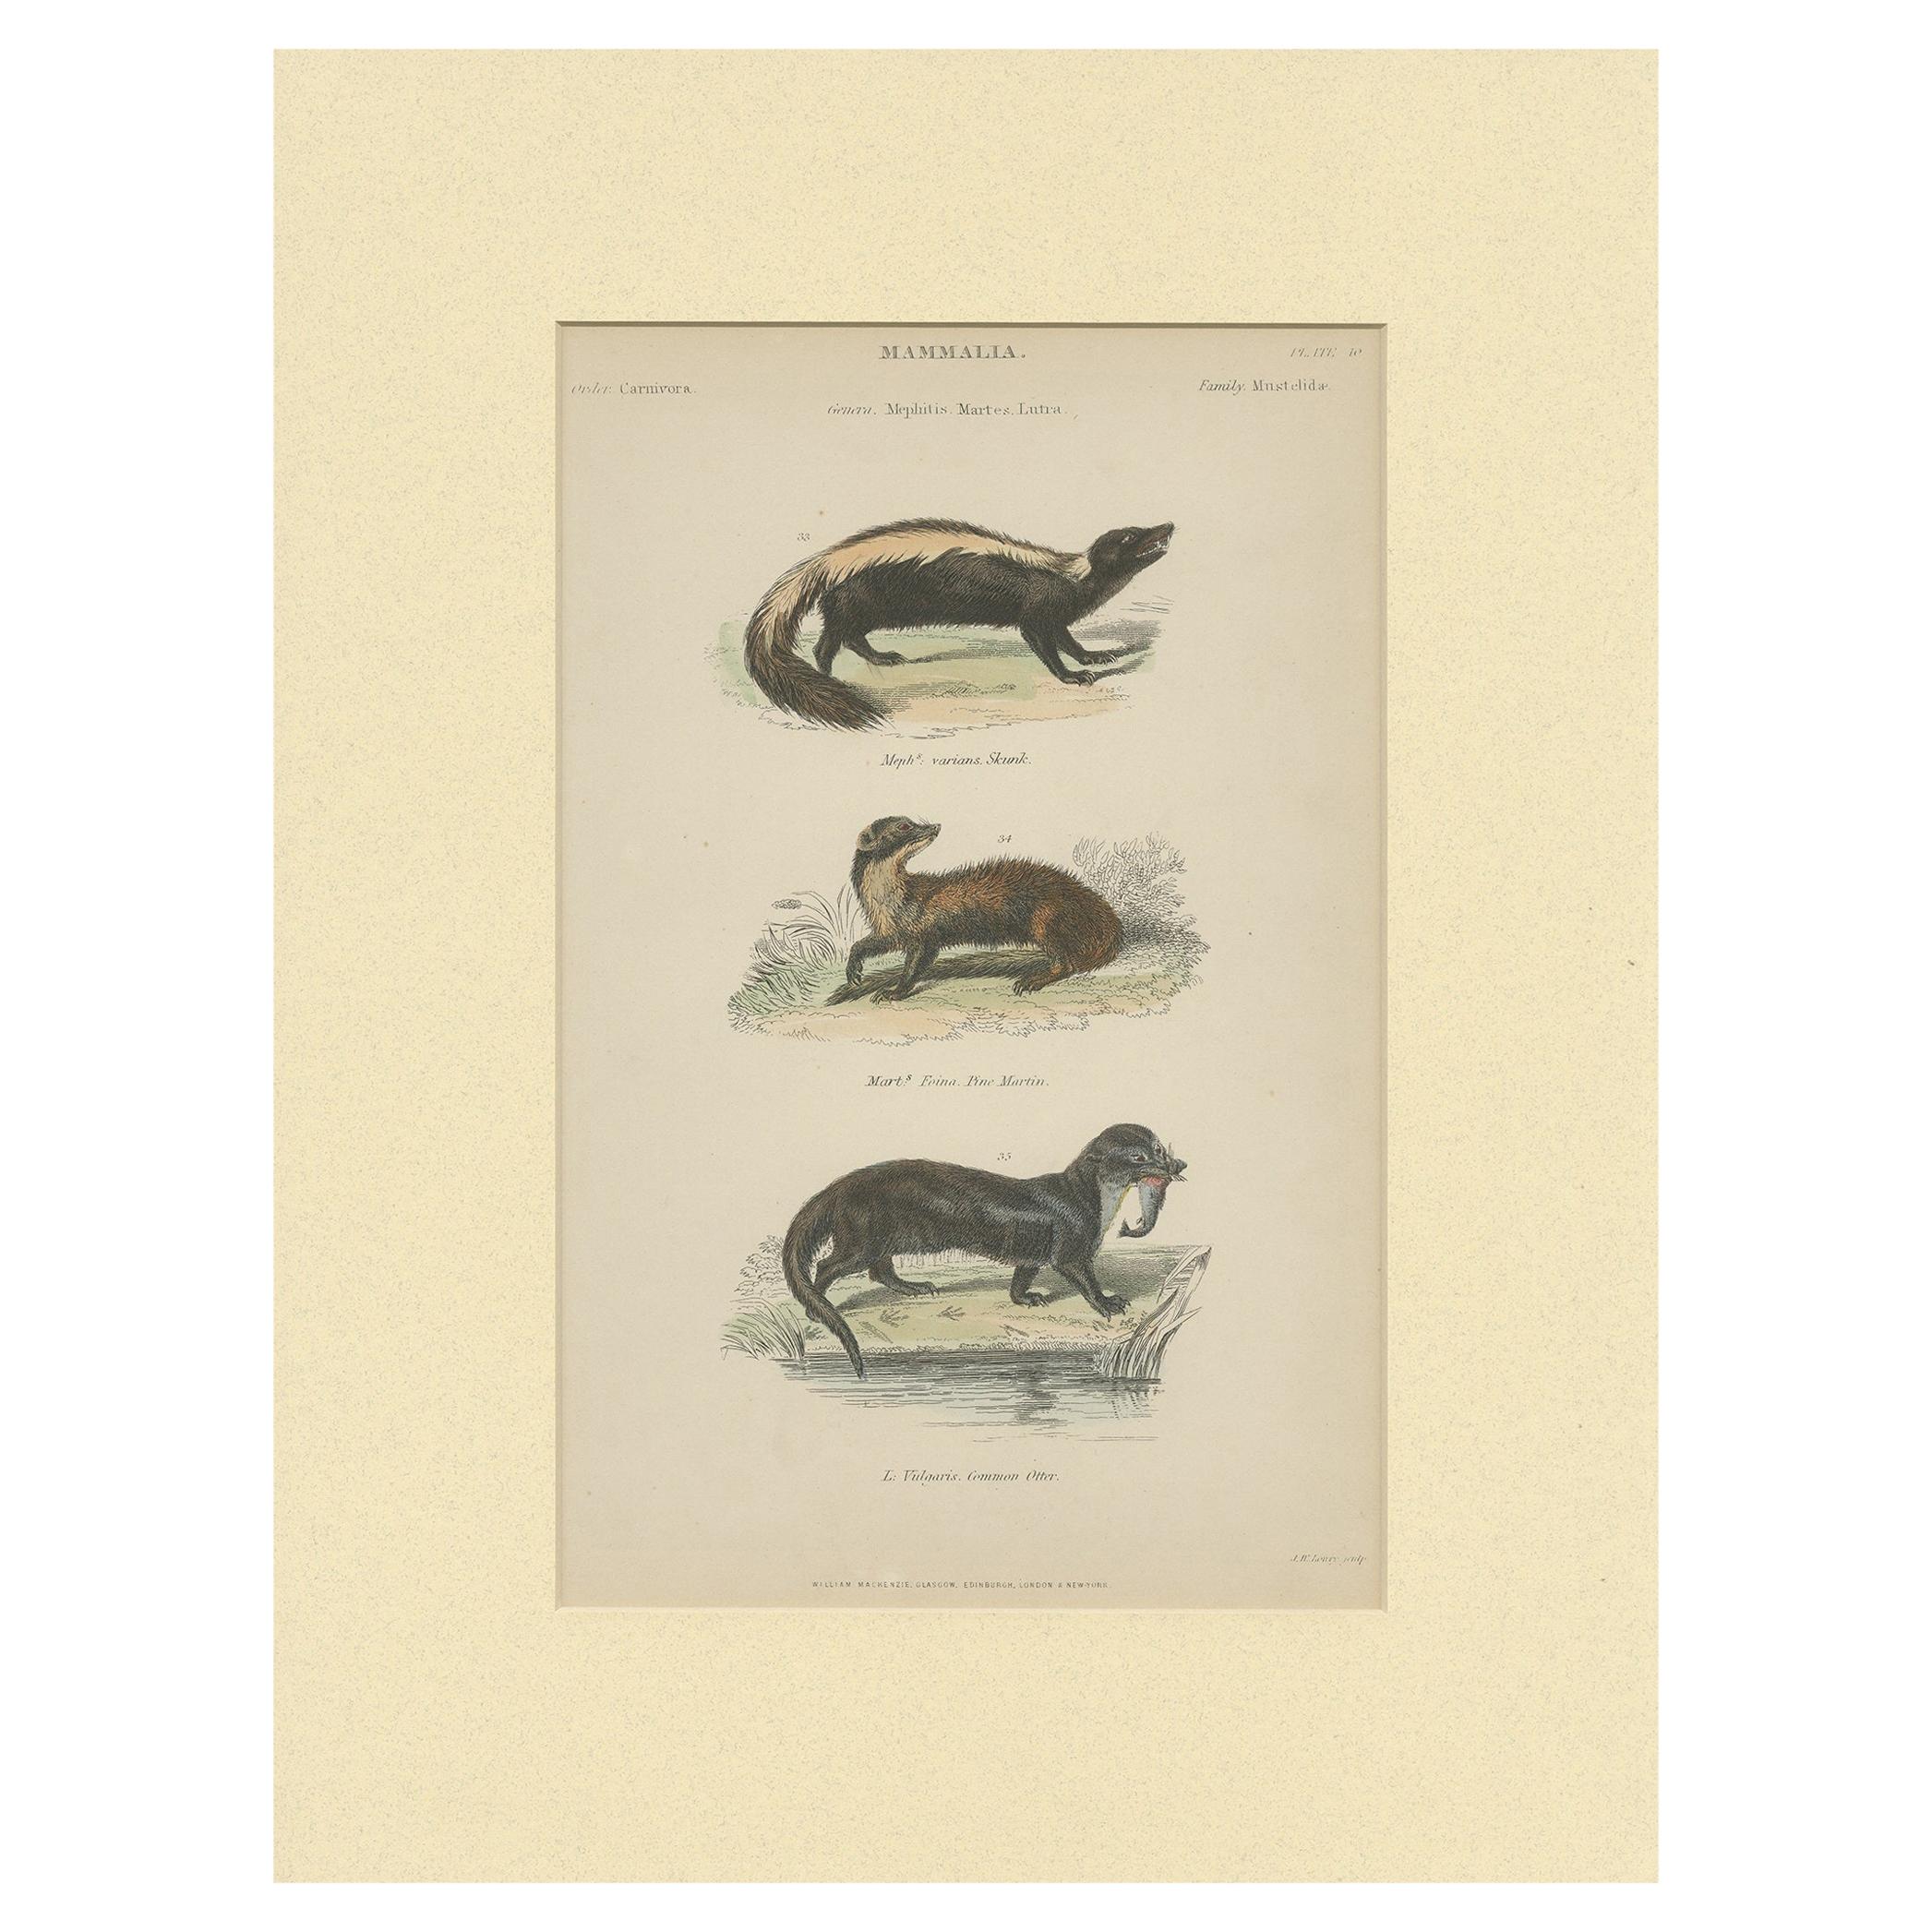 Pl. 10 Antique Print of a Skunk, Martin and Otter by Richardson 'circa 1860'